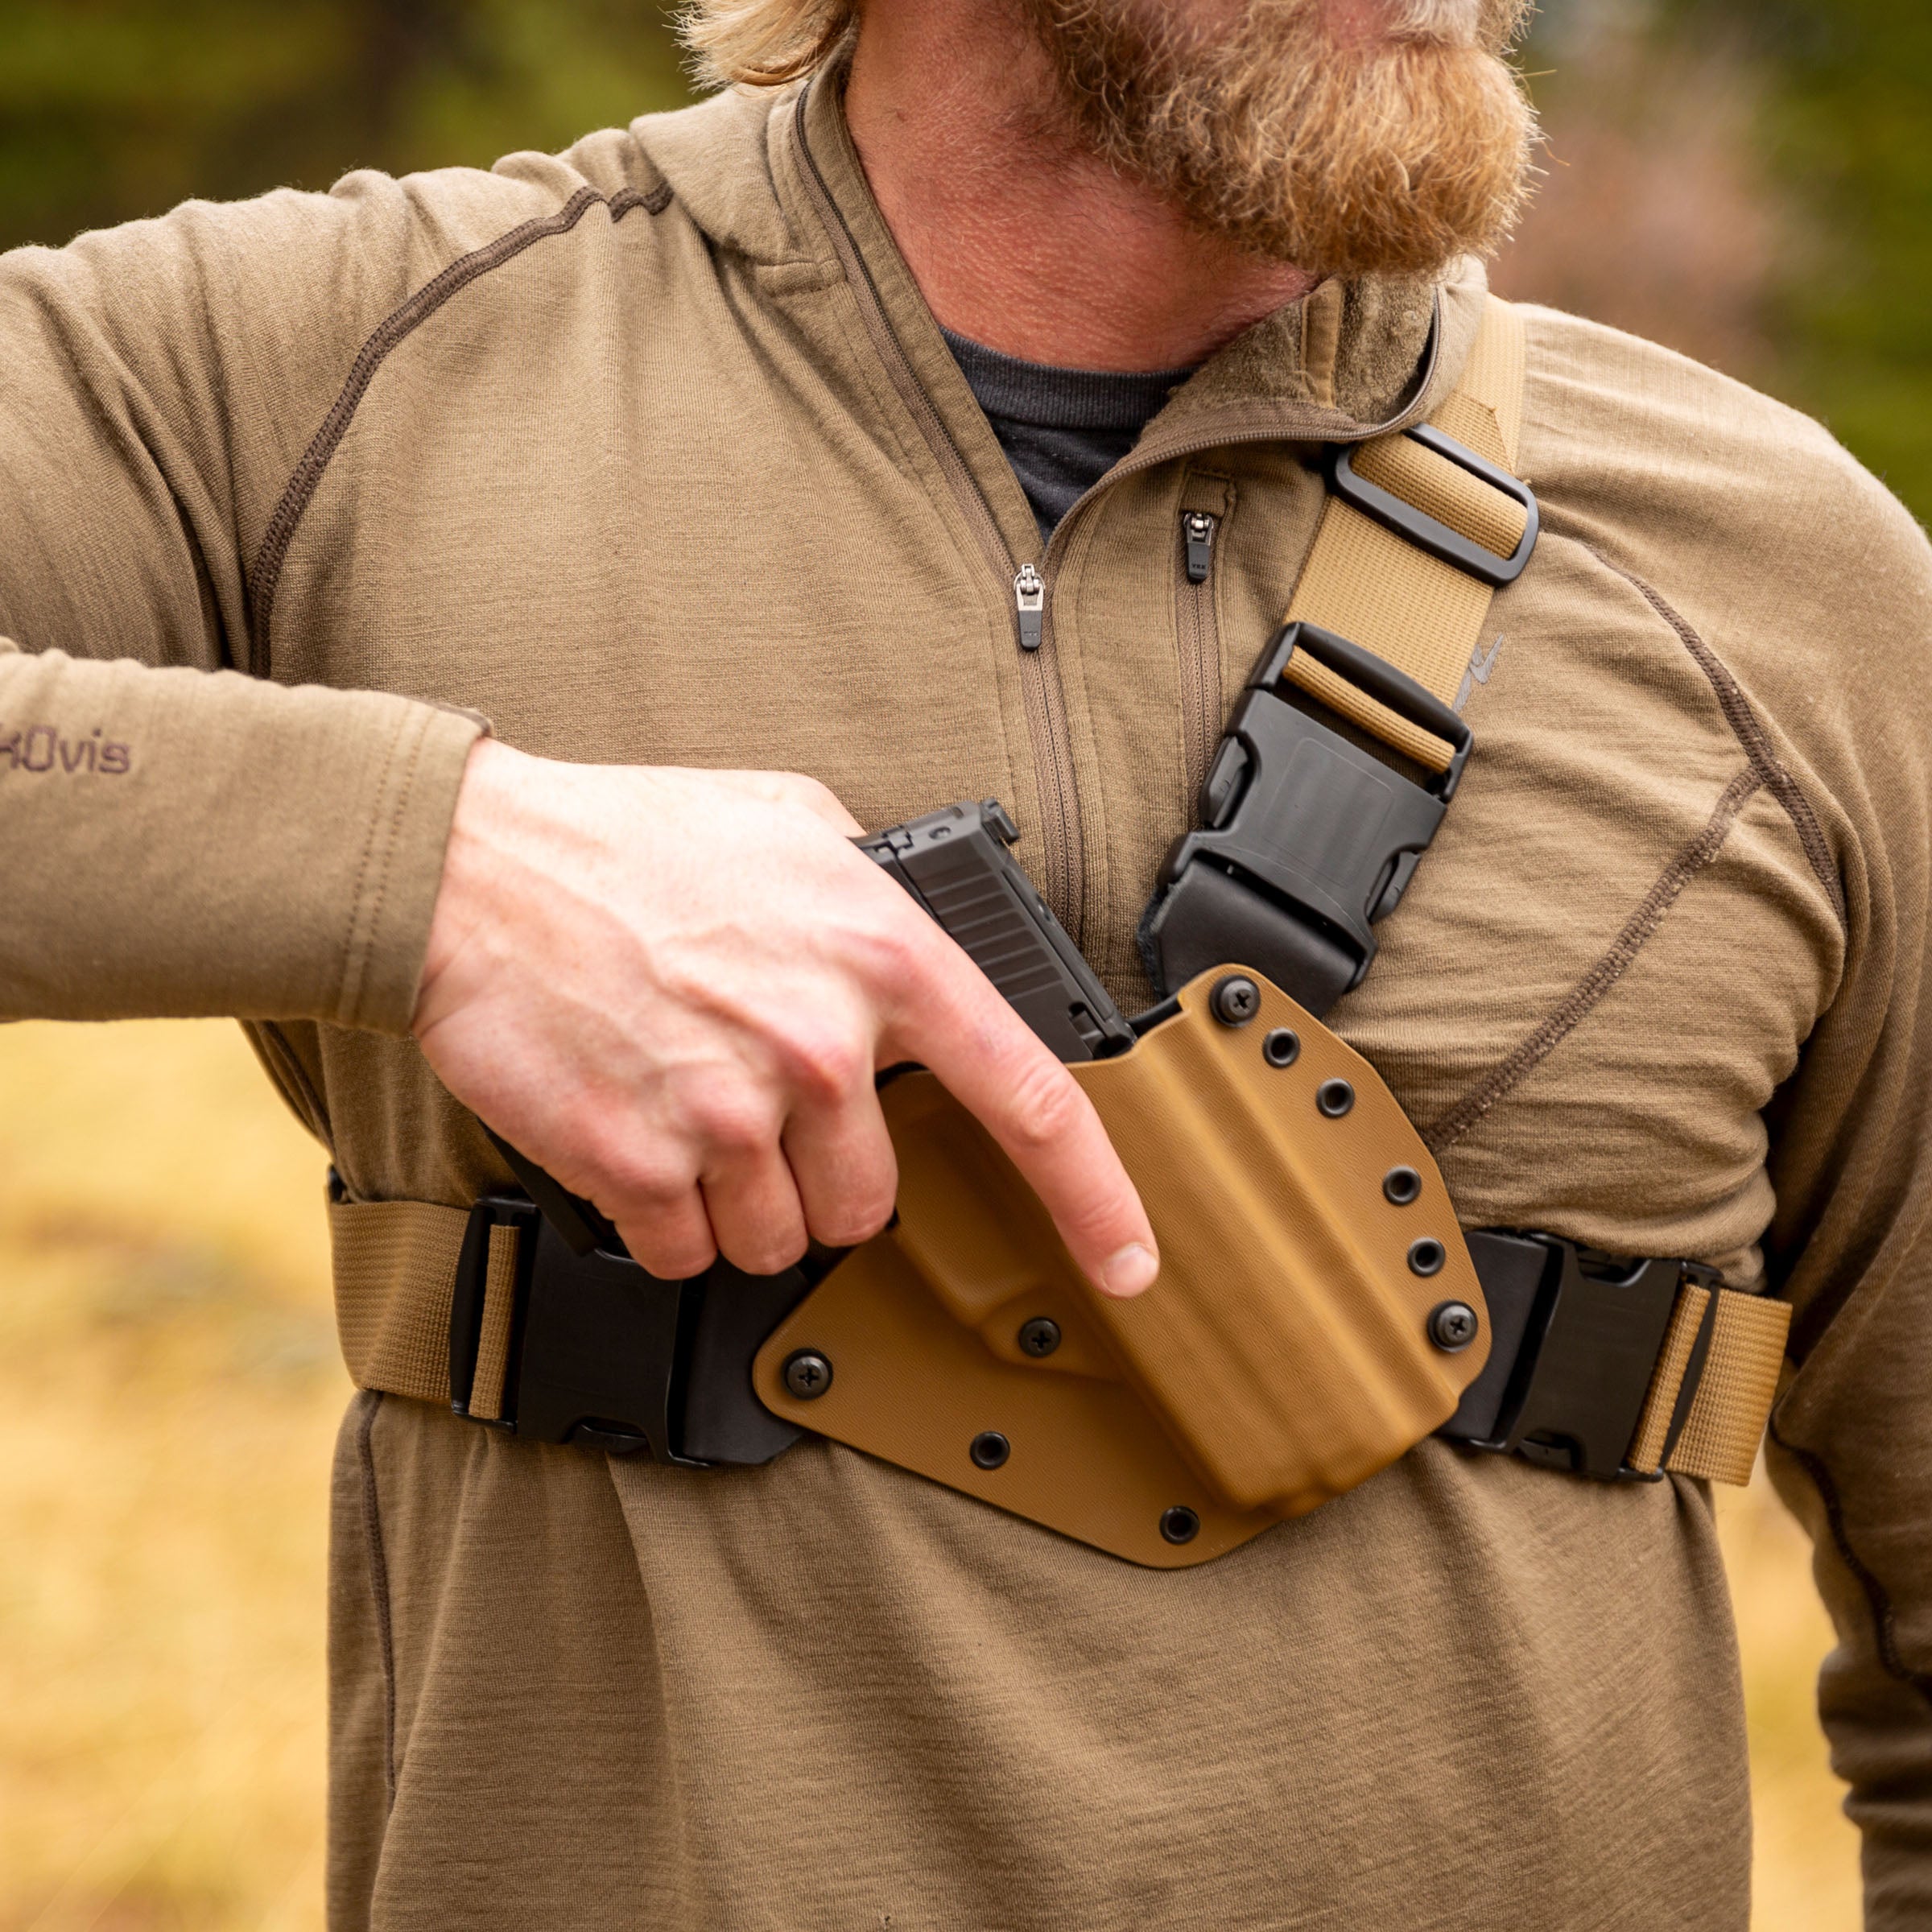 How To Shop For A Chest Holster